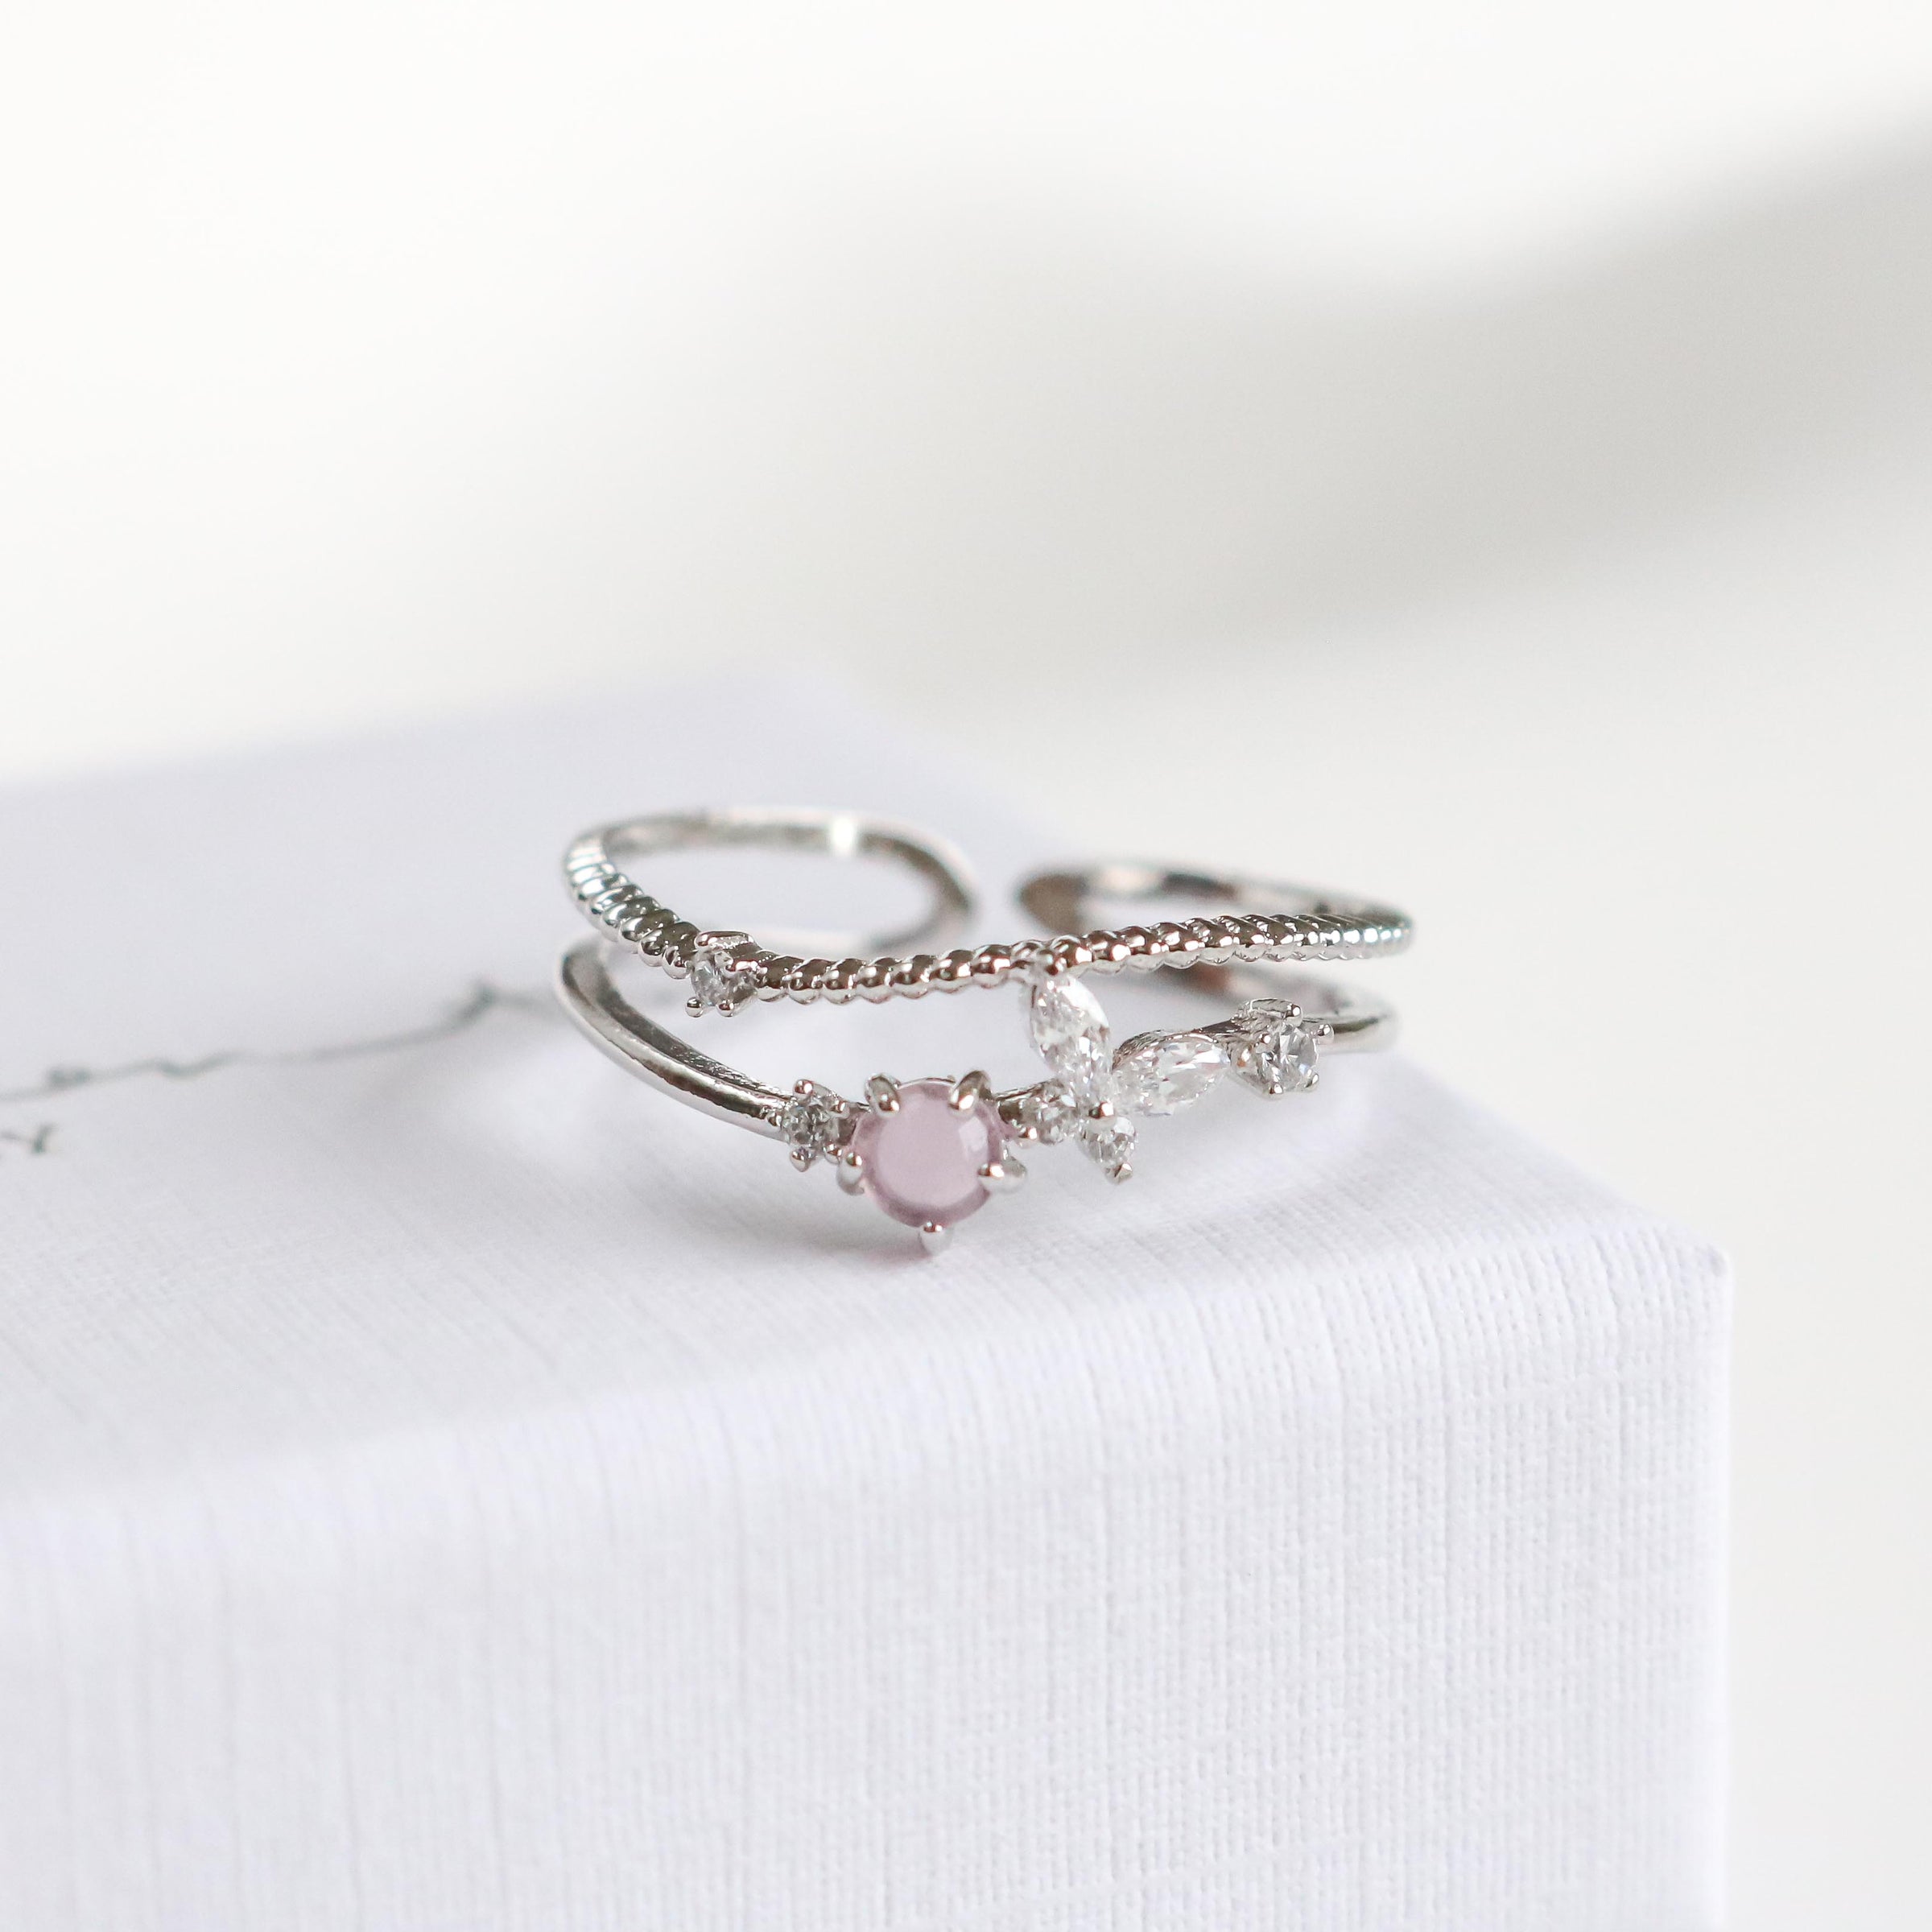 Silver Butterfly Ring, Stackable Ring, Silver Stacking Ring, Dainty Silver  Ring, Girls Ring, Stacking Ring, Butterfly Ring Butterfly Jewelry 